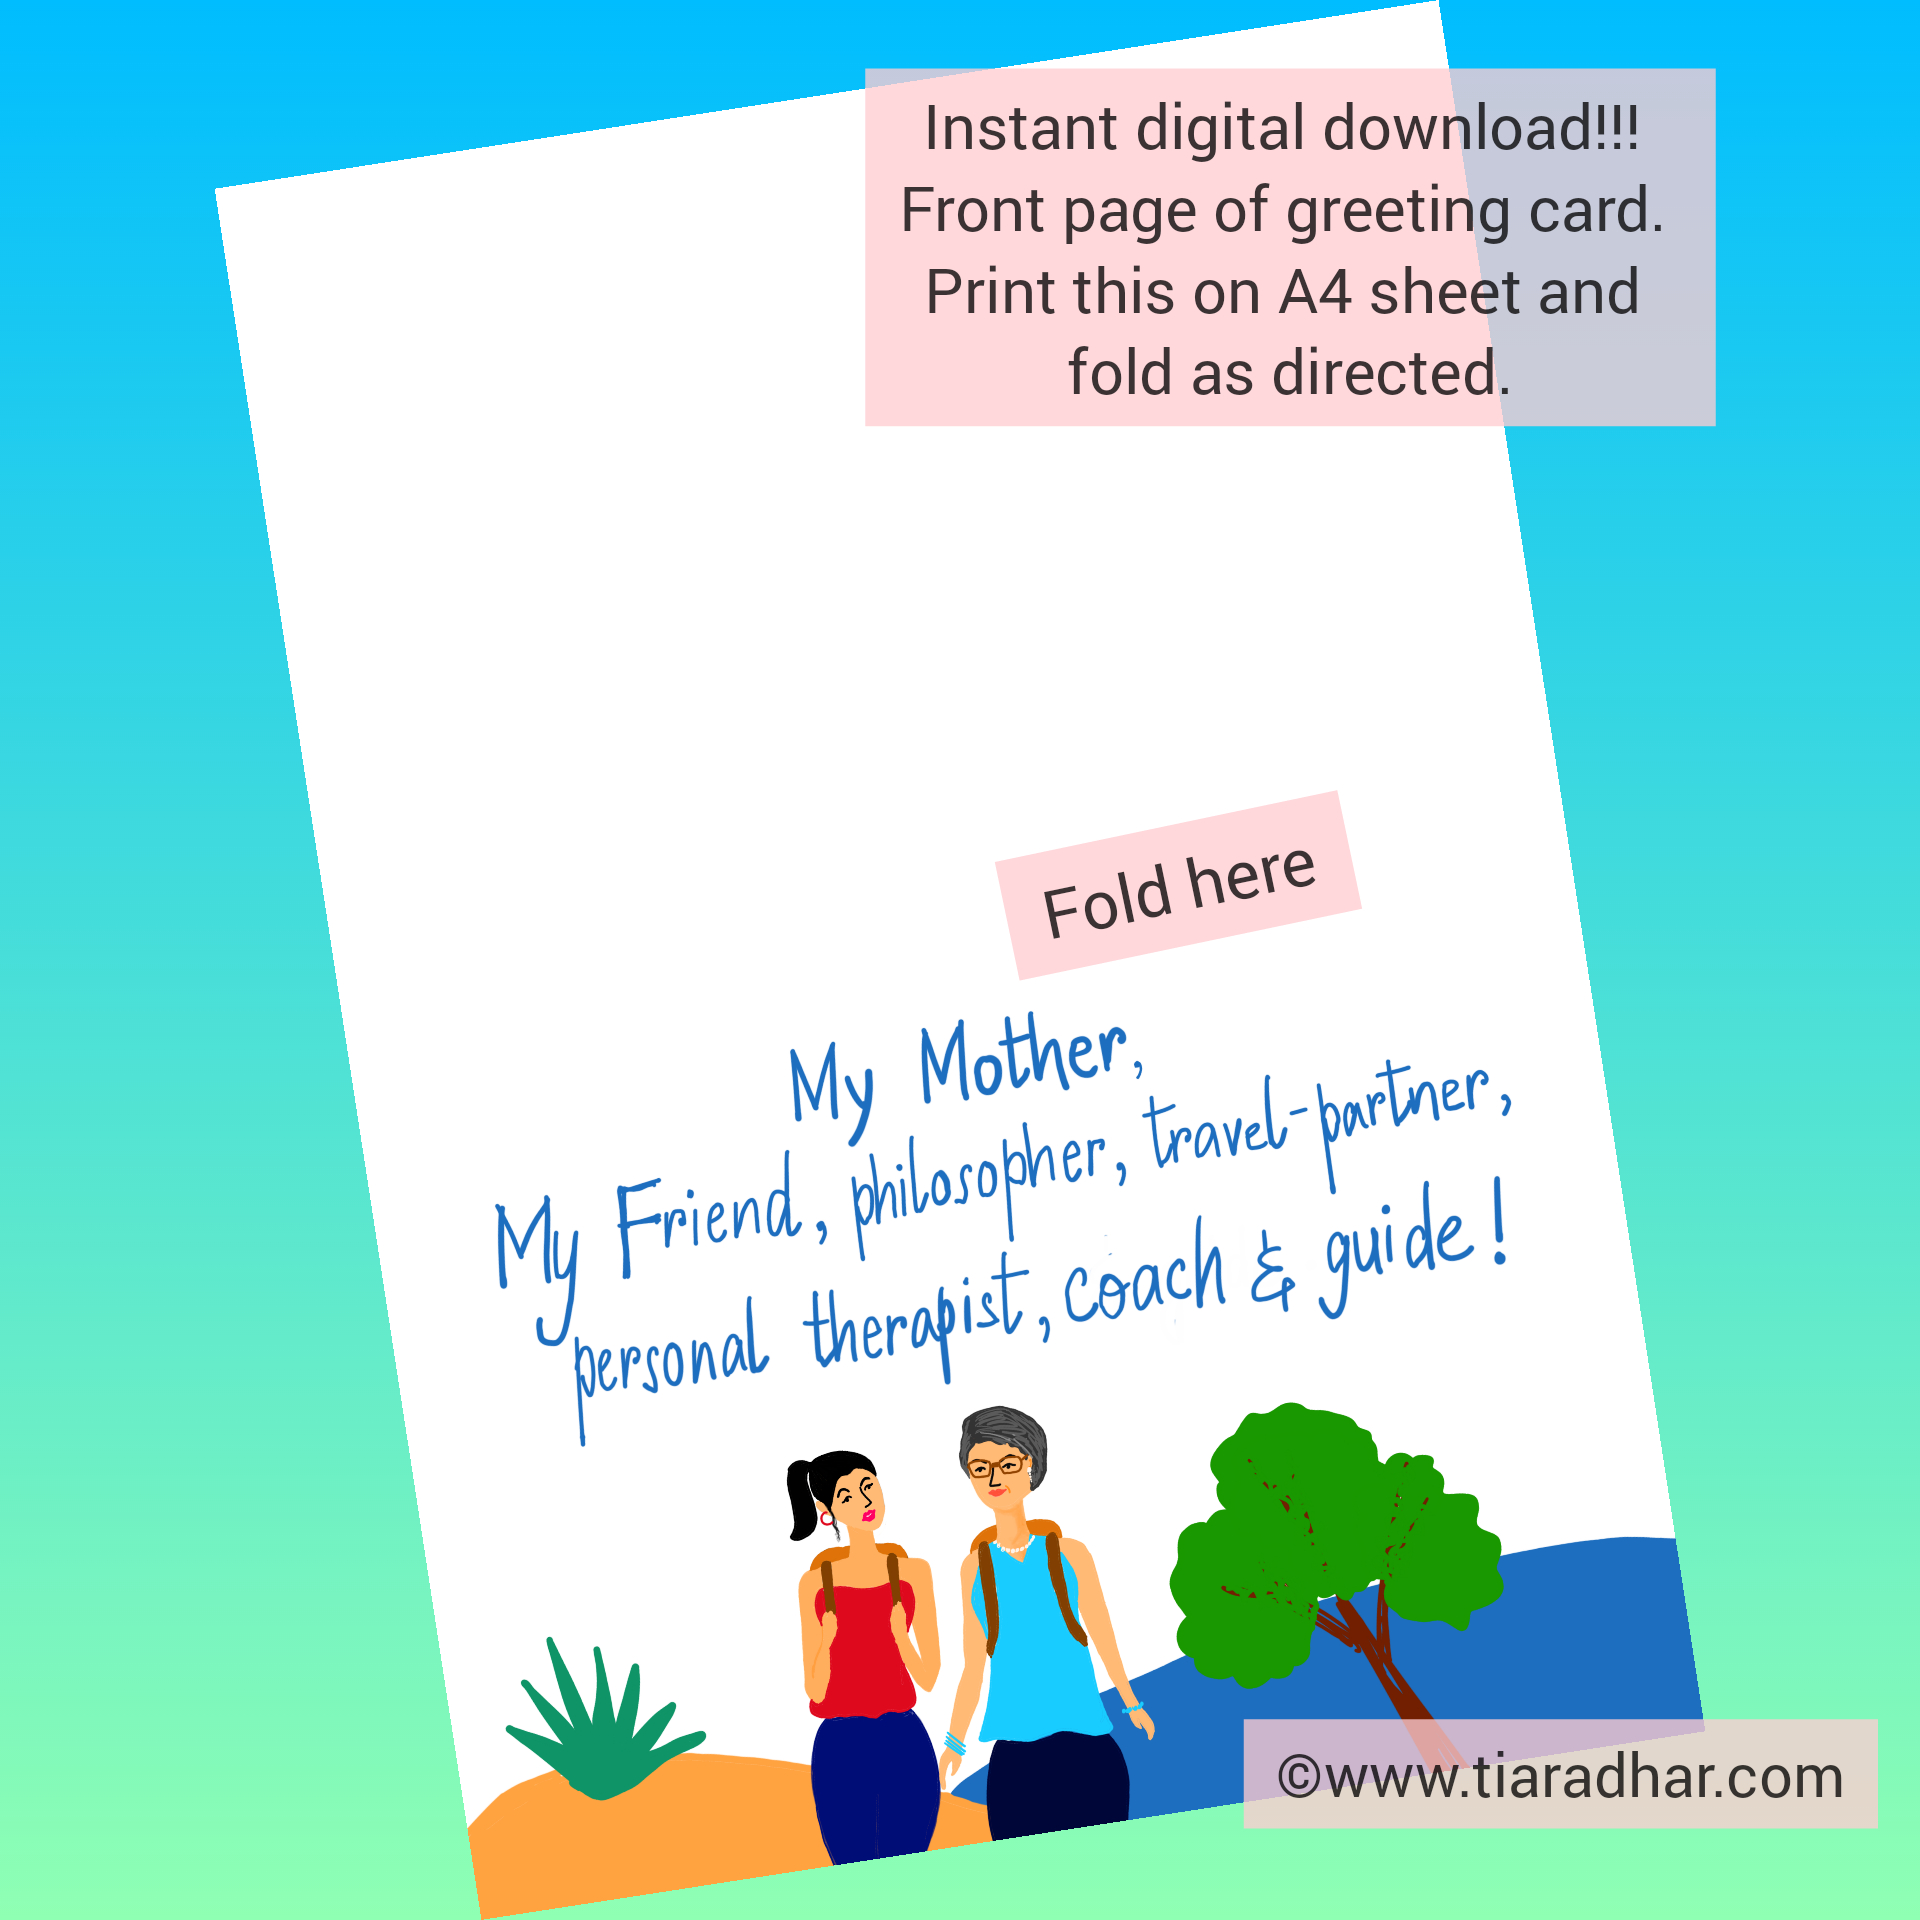 Happy Mother's Day Travel Partner card & poster bundle